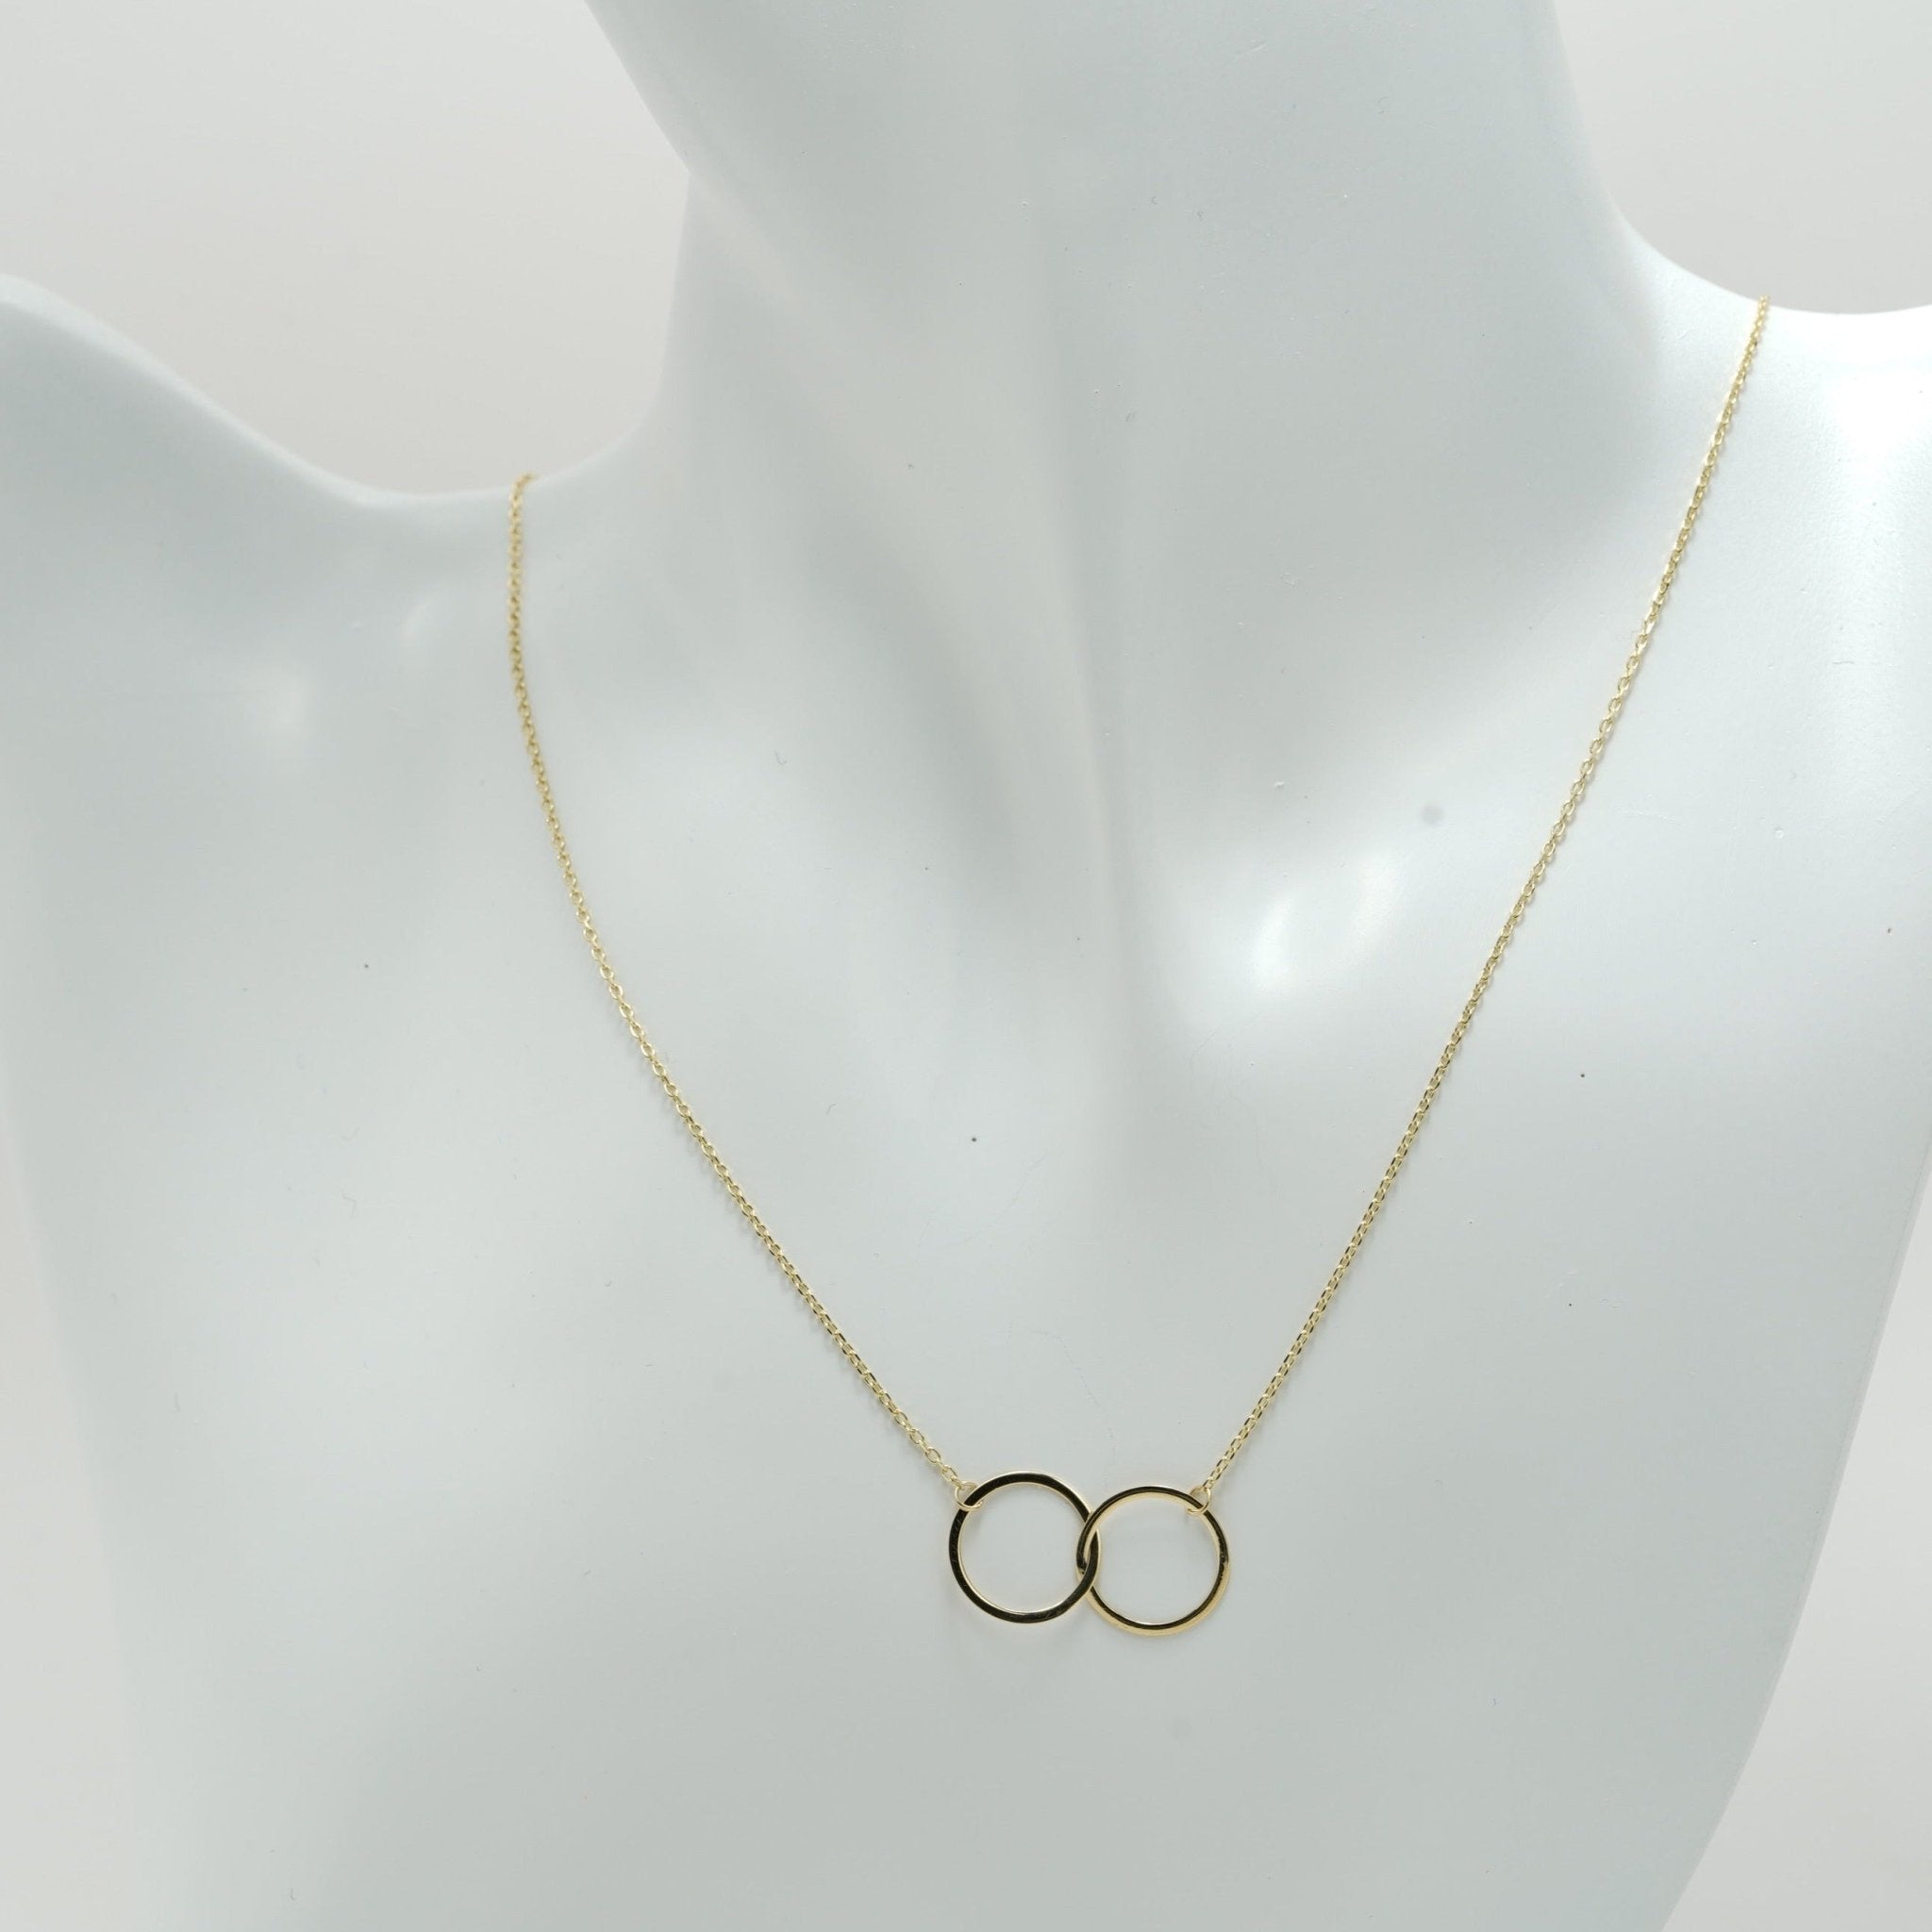 Bespoke Silver Double Circle Name Necklace | Jewellerybox.co.uk